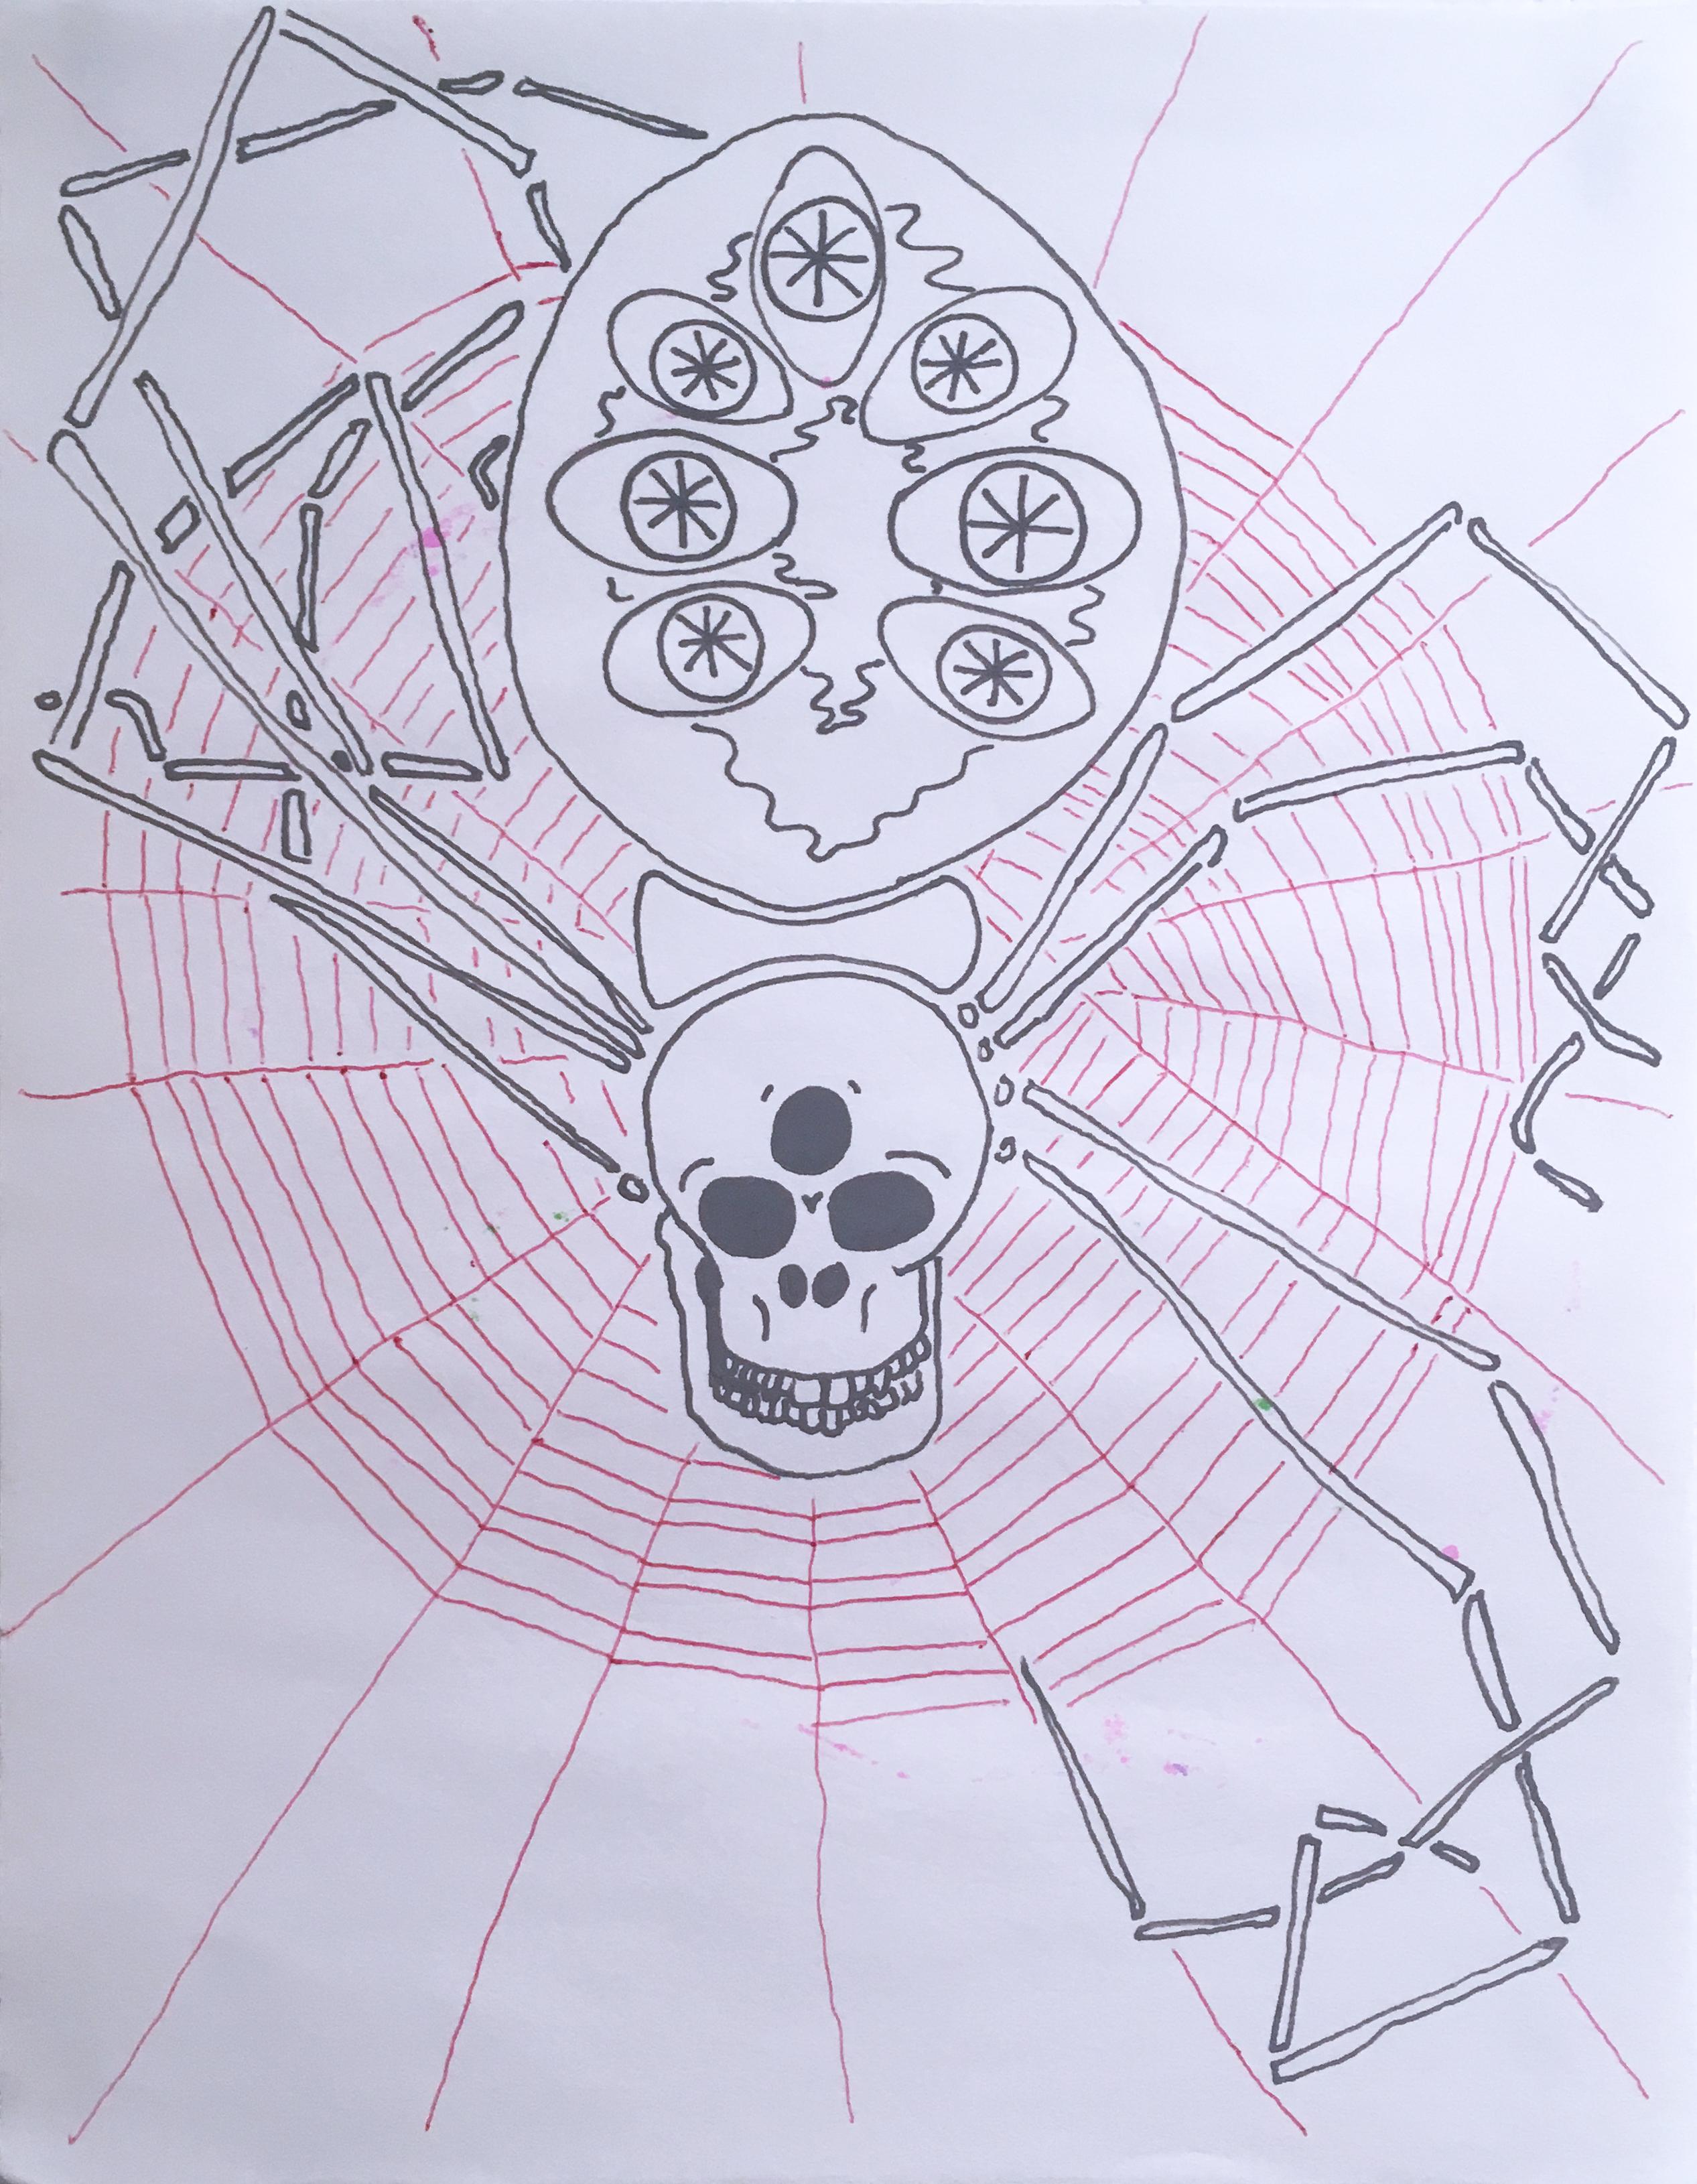 Red Web, 2020, gel pen, red, spider, drawing, black, skull, web, white - Art by Macauley Norman